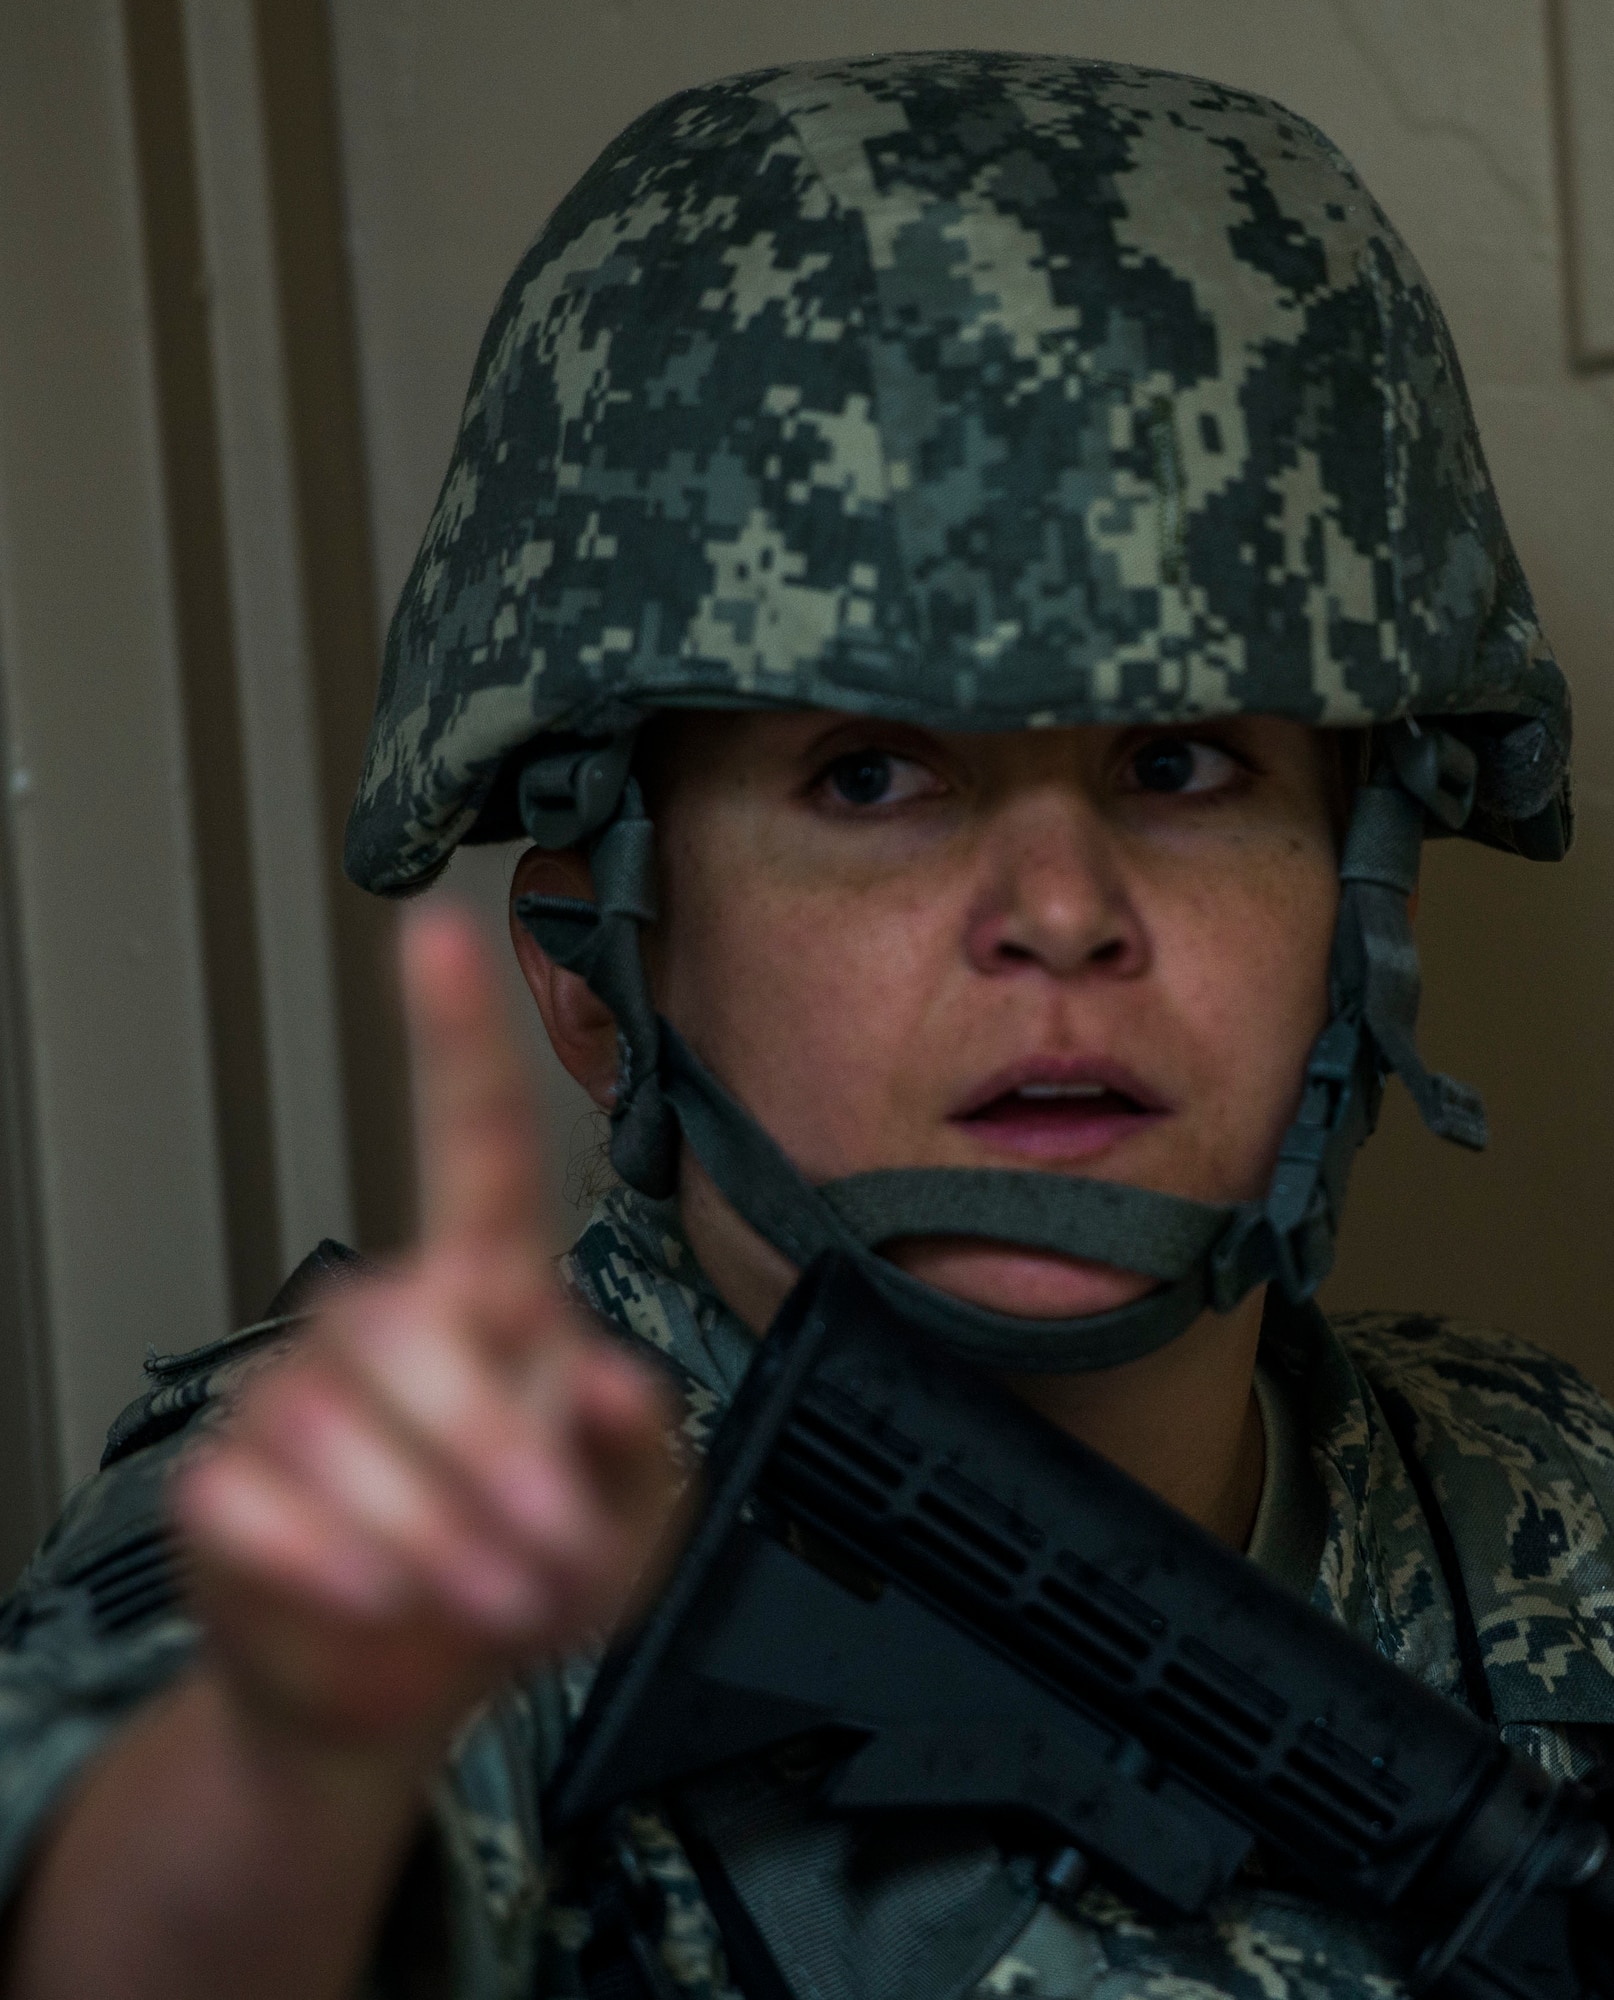 Staff Sgt. Alexa Marro, 375th Security Forces Squadron, signals for another individual to follow during an active shooter exercise, , Scott Air Force Base, Ill., Sept. 9, 2016.  With an increase of mass shootings, the Department of Defense has trained personnel and first responders on how to respond in an active shooter situation.